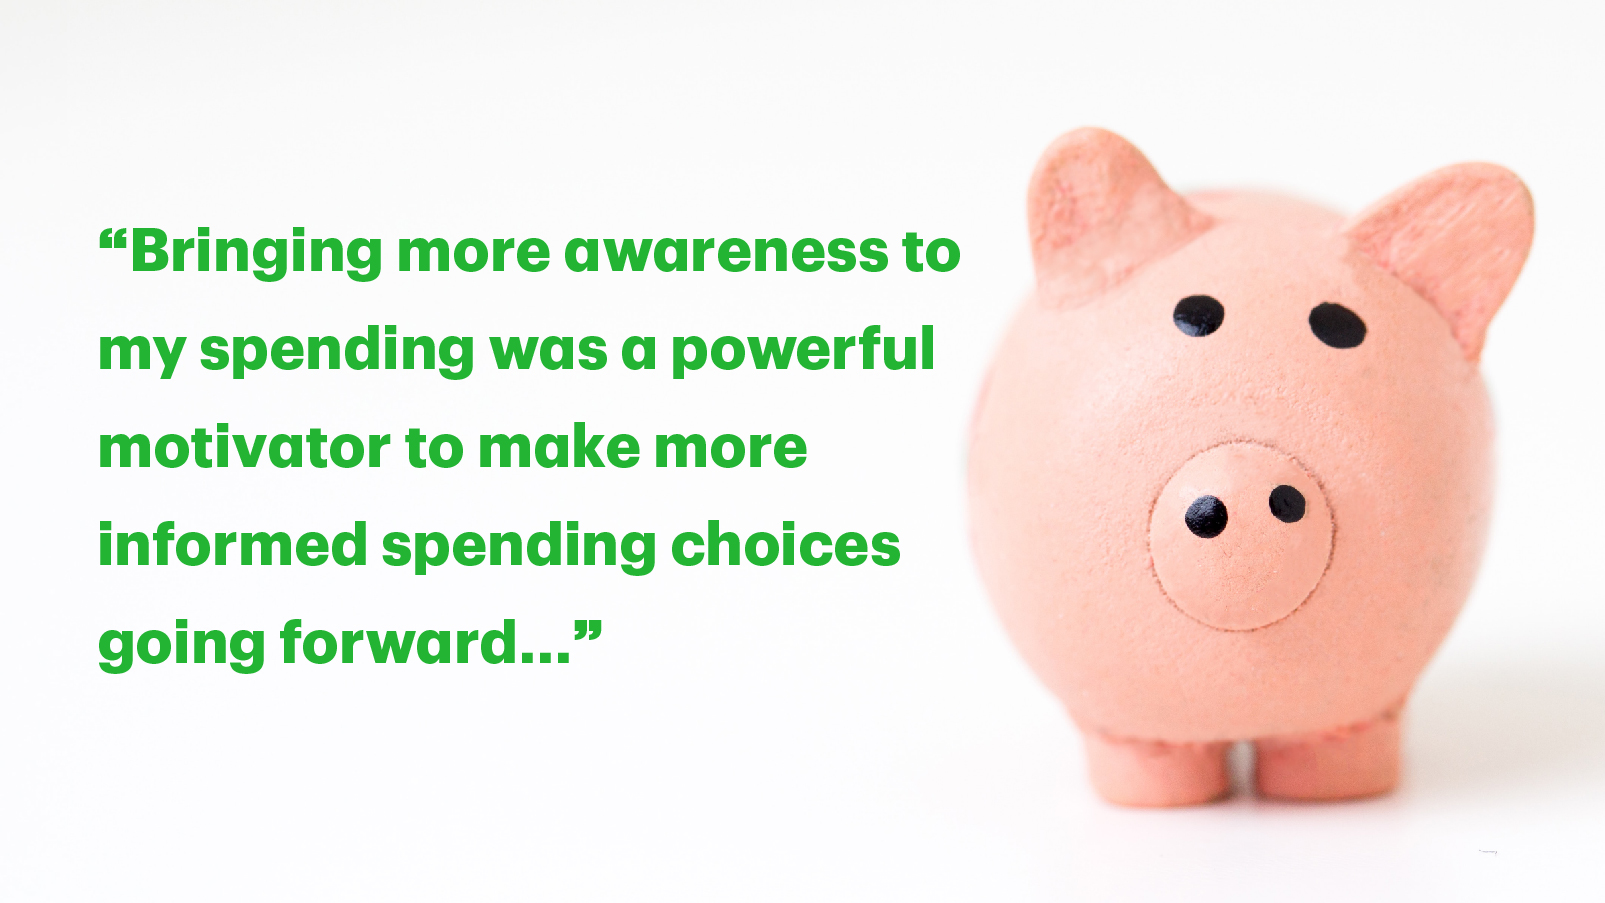 Text graphic with the quote "Bringing more awareness to my spending was a powerful motivator to make more informed spending choices going forward."